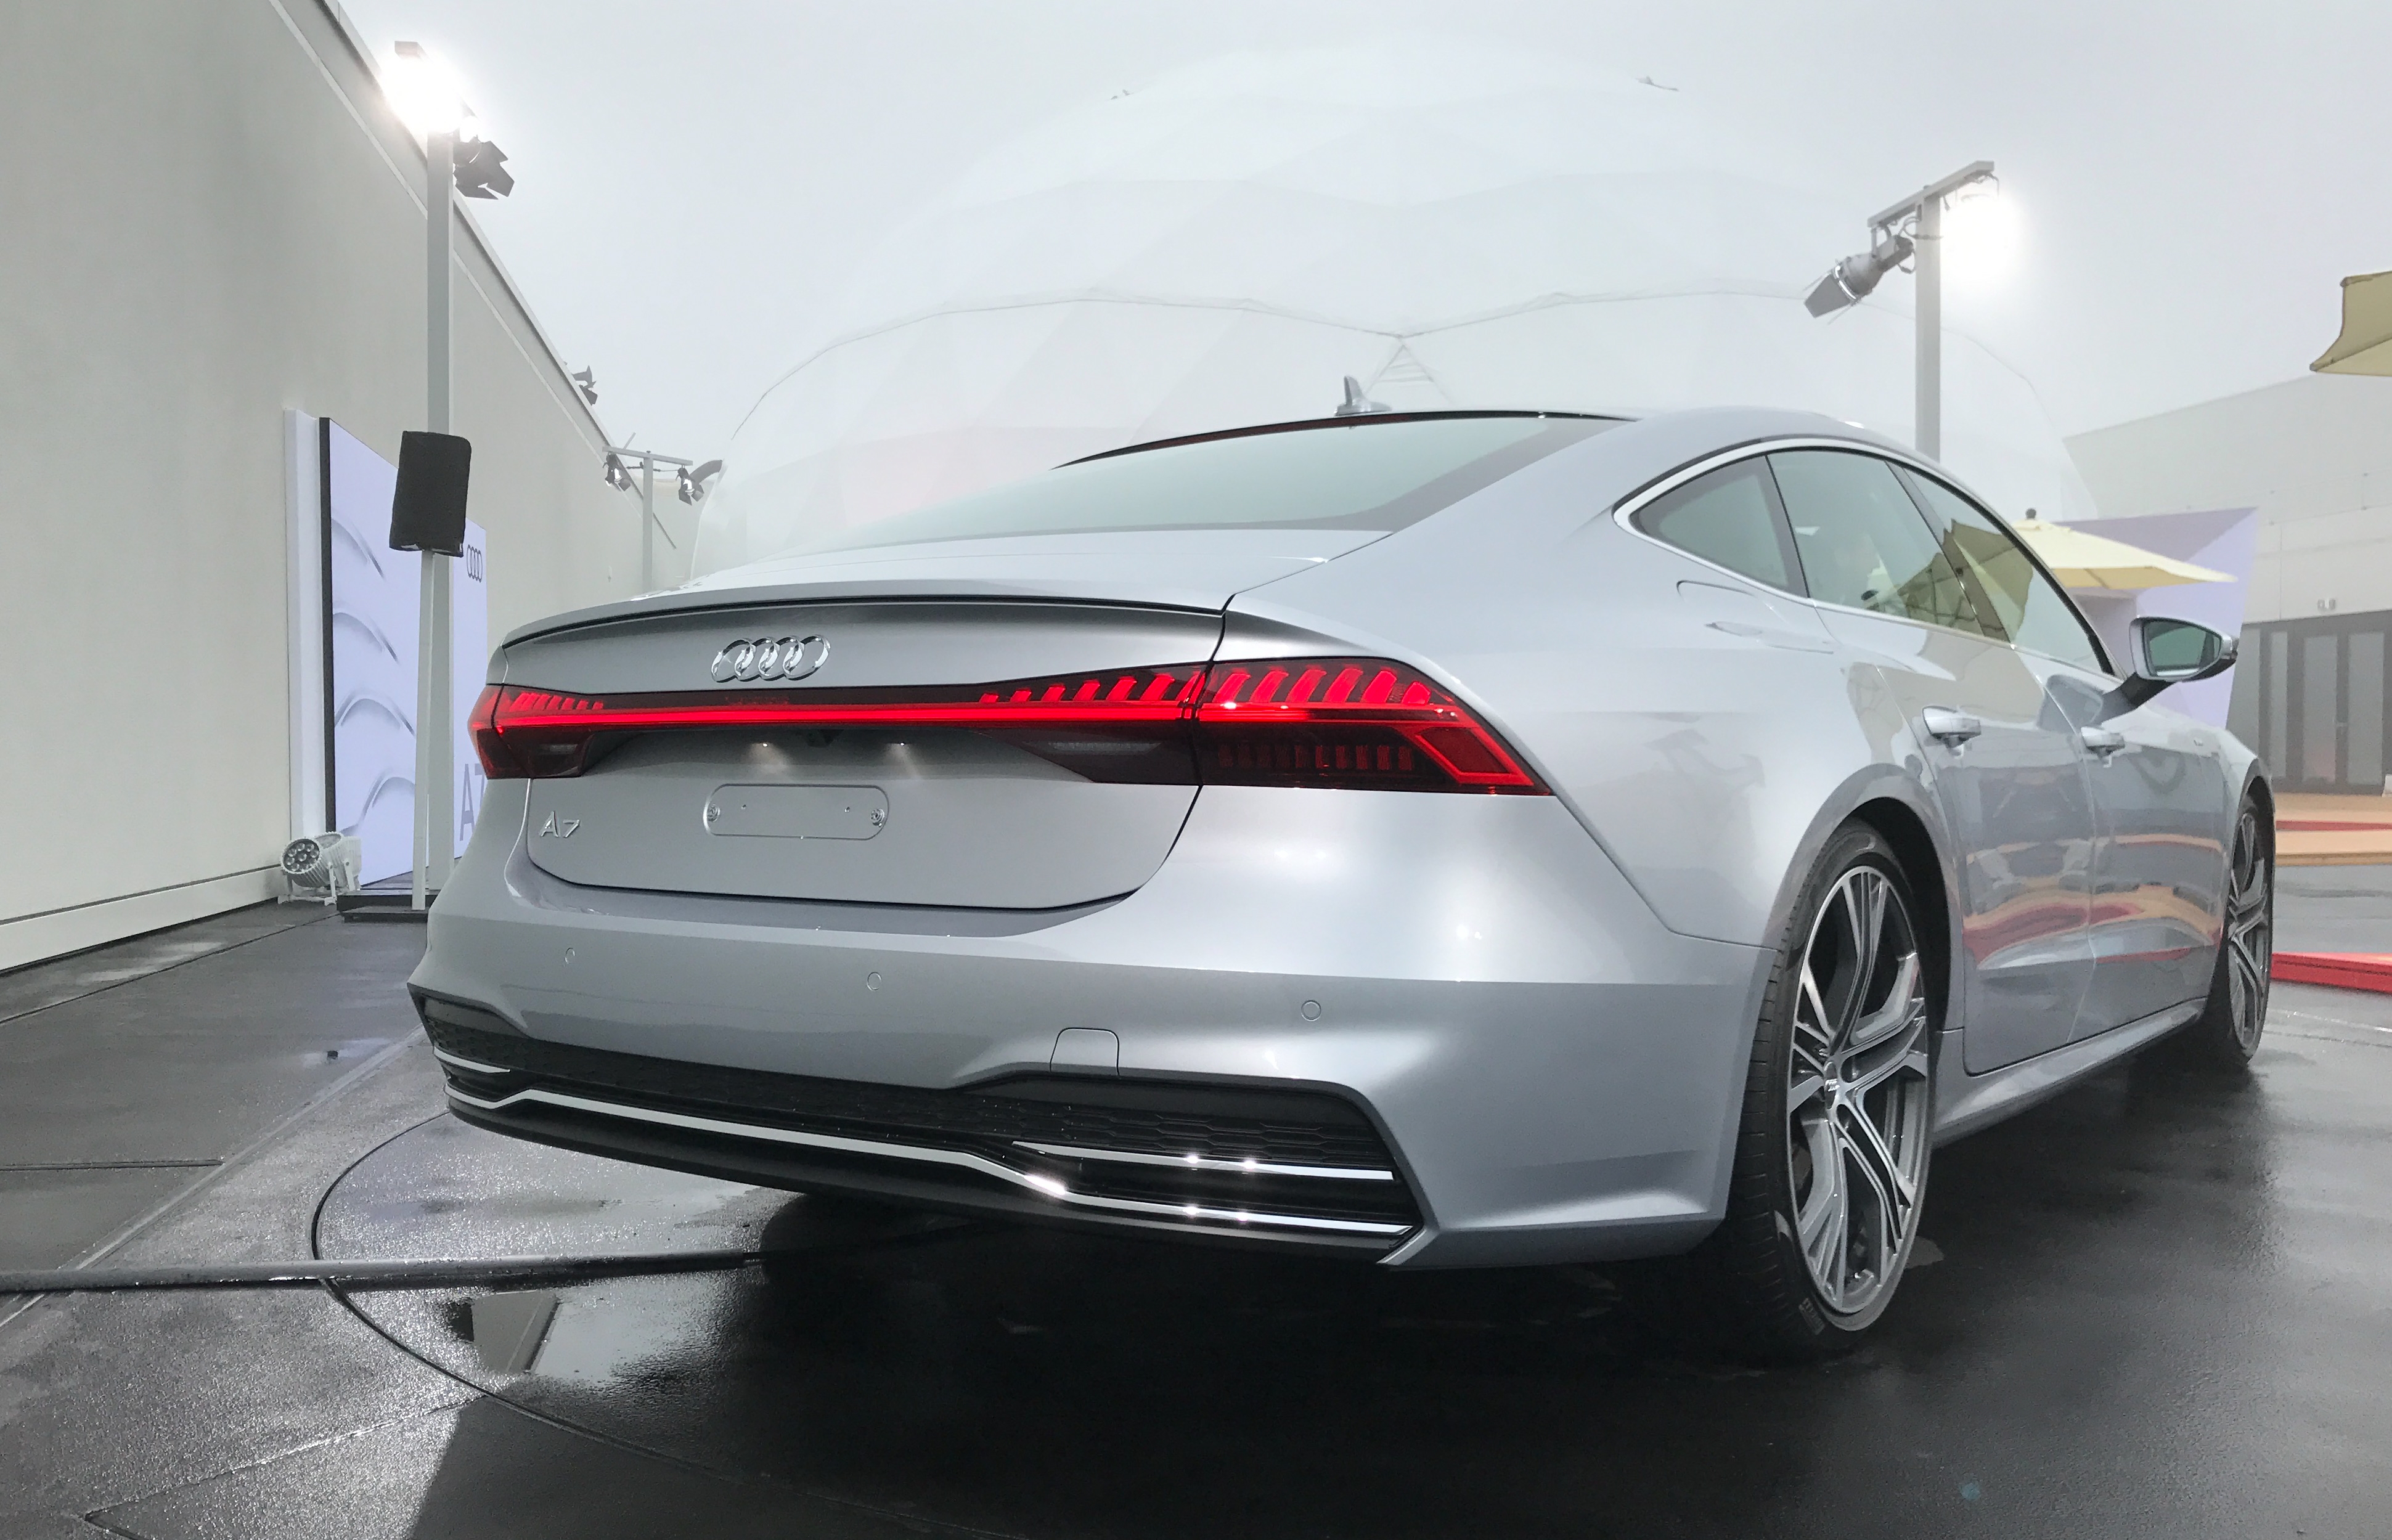 Audi A7 Sportback accessories specifications